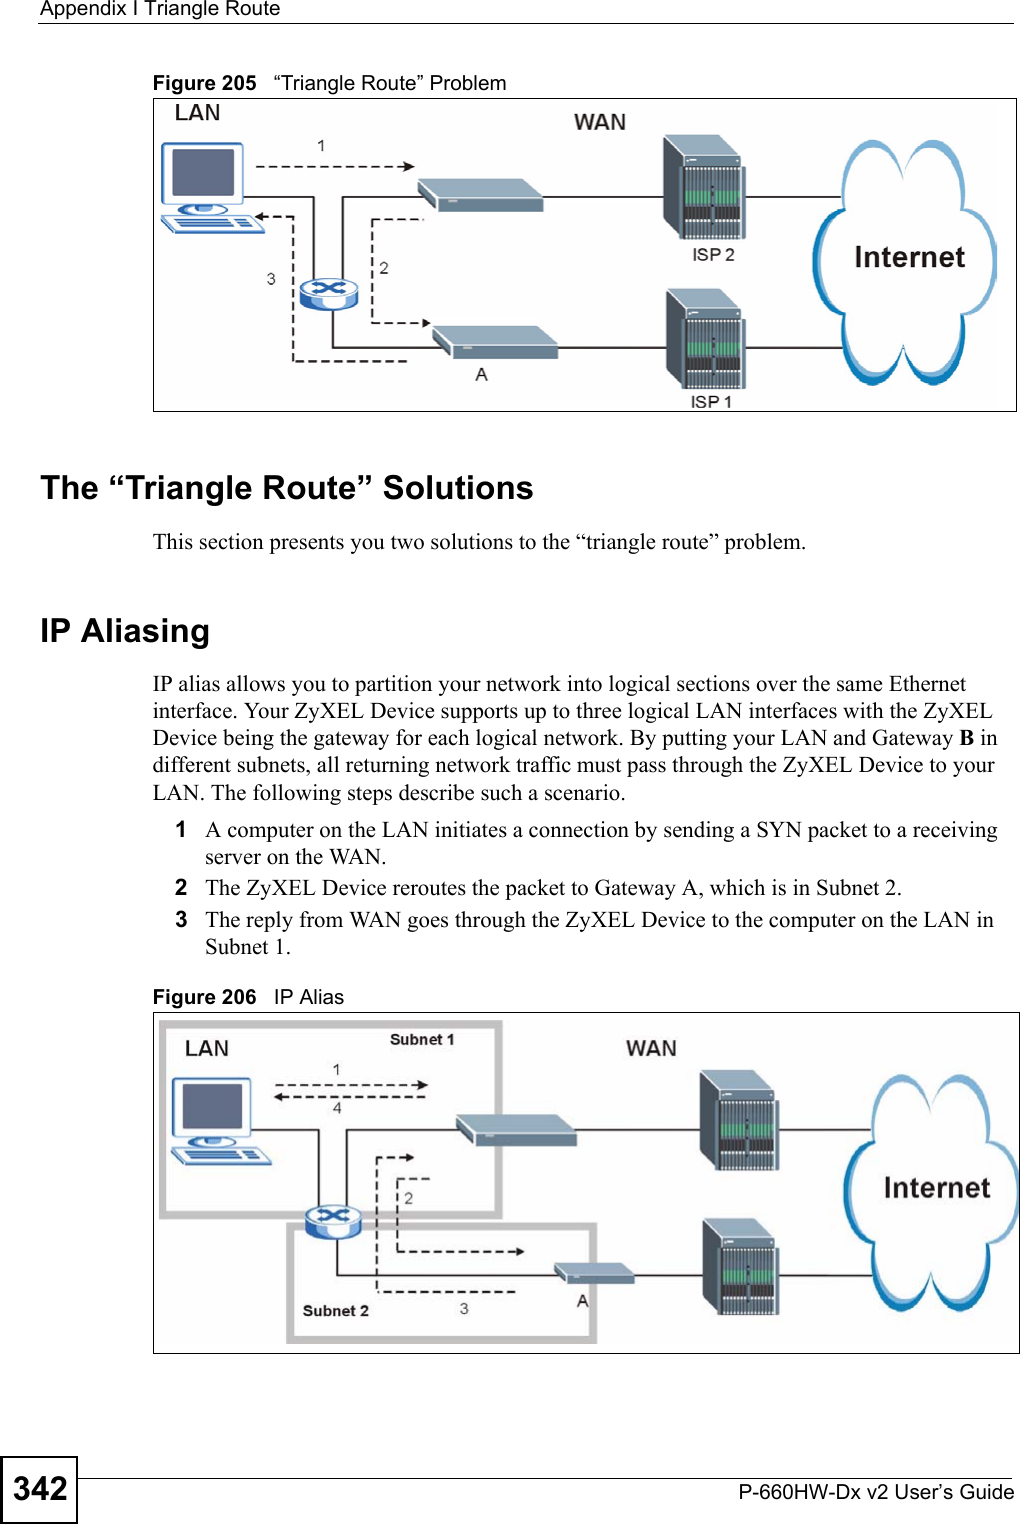 Appendix I Triangle RouteP-660HW-Dx v2 User’s Guide342Figure 205   “Triangle Route” ProblemThe “Triangle Route” SolutionsThis section presents you two solutions to the “triangle route” problem. IP Aliasing IP alias allows you to partition your network into logical sections over the same Ethernet interface. Your ZyXEL Device supports up to three logical LAN interfaces with the ZyXEL Device being the gateway for each logical network. By putting your LAN and Gateway B in different subnets, all returning network traffic must pass through the ZyXEL Device to your LAN. The following steps describe such a scenario.1A computer on the LAN initiates a connection by sending a SYN packet to a receiving server on the WAN. 2The ZyXEL Device reroutes the packet to Gateway A, which is in Subnet 2. 3The reply from WAN goes through the ZyXEL Device to the computer on the LAN in Subnet 1. Figure 206   IP Alias